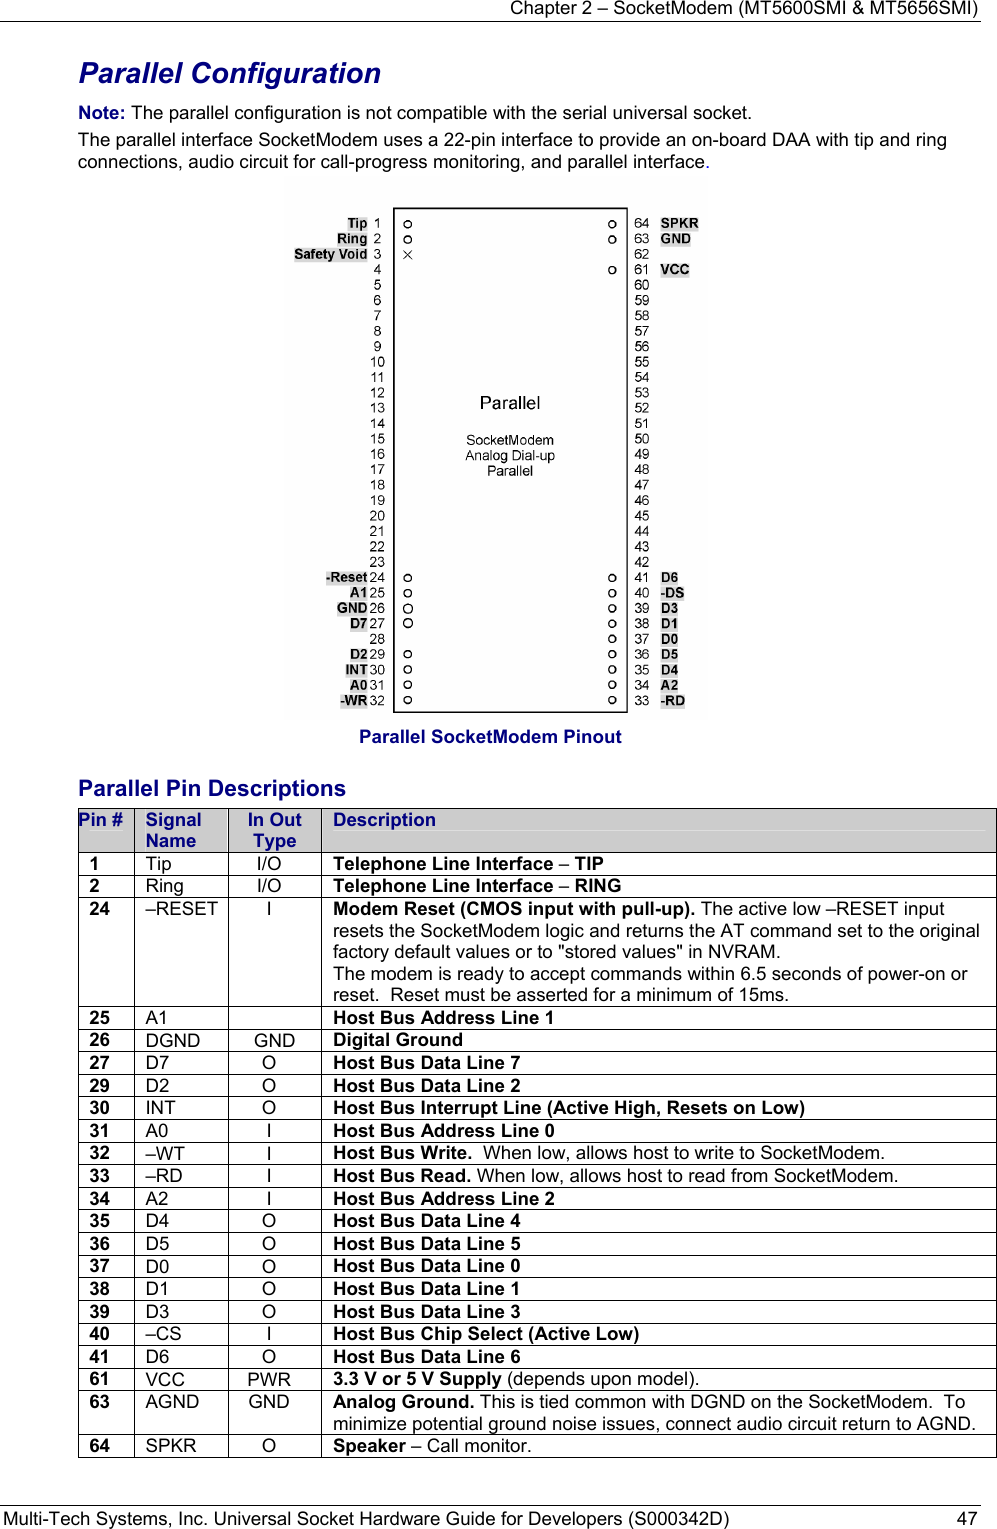 Chapter 2 – SocketModem (MT5600SMI &amp; MT5656SMI) Multi-Tech Systems, Inc. Universal Socket Hardware Guide for Developers (S000342D)  47  Parallel Configuration Note: The parallel configuration is not compatible with the serial universal socket. The parallel interface SocketModem uses a 22-pin interface to provide an on-board DAA with tip and ring connections, audio circuit for call-progress monitoring, and parallel interface.  Parallel SocketModem Pinout  Parallel Pin Descriptions Pin #  Signal Name In Out Type Description 1  Tip I/O Telephone Line Interface – TIP  2  Ring I/O Telephone Line Interface – RING 24  –RESET I  Modem Reset (CMOS input with pull-up). The active low –RESET input resets the SocketModem logic and returns the AT command set to the original factory default values or to &quot;stored values&quot; in NVRAM. The modem is ready to accept commands within 6.5 seconds of power-on or reset.  Reset must be asserted for a minimum of 15ms. 25  A1  Host Bus Address Line 1 26  DGND GND Digital Ground 27  D7 O Host Bus Data Line 7 29  D2 O Host Bus Data Line 2 30  INT O Host Bus Interrupt Line (Active High, Resets on Low) 31  A0 I Host Bus Address Line 0 32  –WT I Host Bus Write.  When low, allows host to write to SocketModem.  33  –RD I Host Bus Read. When low, allows host to read from SocketModem.  34  A2 I Host Bus Address Line 2 35  D4 O Host Bus Data Line 4 36  D5 O Host Bus Data Line 5 37  D0 O Host Bus Data Line 0 38  D1 O Host Bus Data Line 1 39  D3 O Host Bus Data Line 3 40  –CS I Host Bus Chip Select (Active Low)   41  D6 O Host Bus Data Line 6 61  VCC PWR 3.3 V or 5 V Supply (depends upon model). 63  AGND GND Analog Ground. This is tied common with DGND on the SocketModem.  To minimize potential ground noise issues, connect audio circuit return to AGND. 64  SPKR O Speaker – Call monitor.  